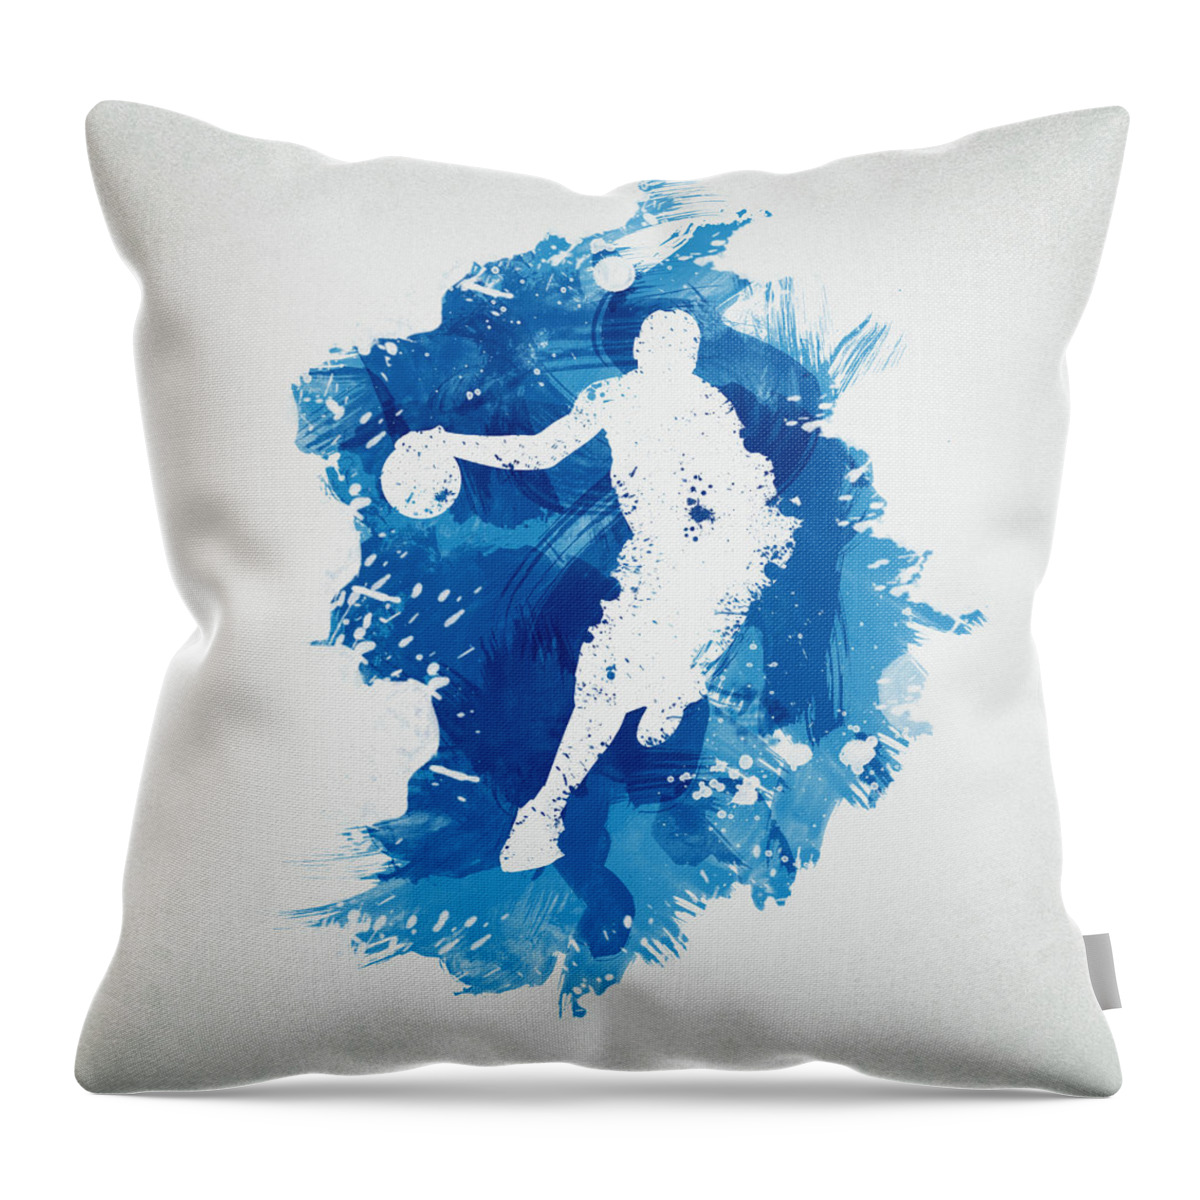 Abstract Throw Pillow featuring the digital art Basketball Player #1 by Aged Pixel